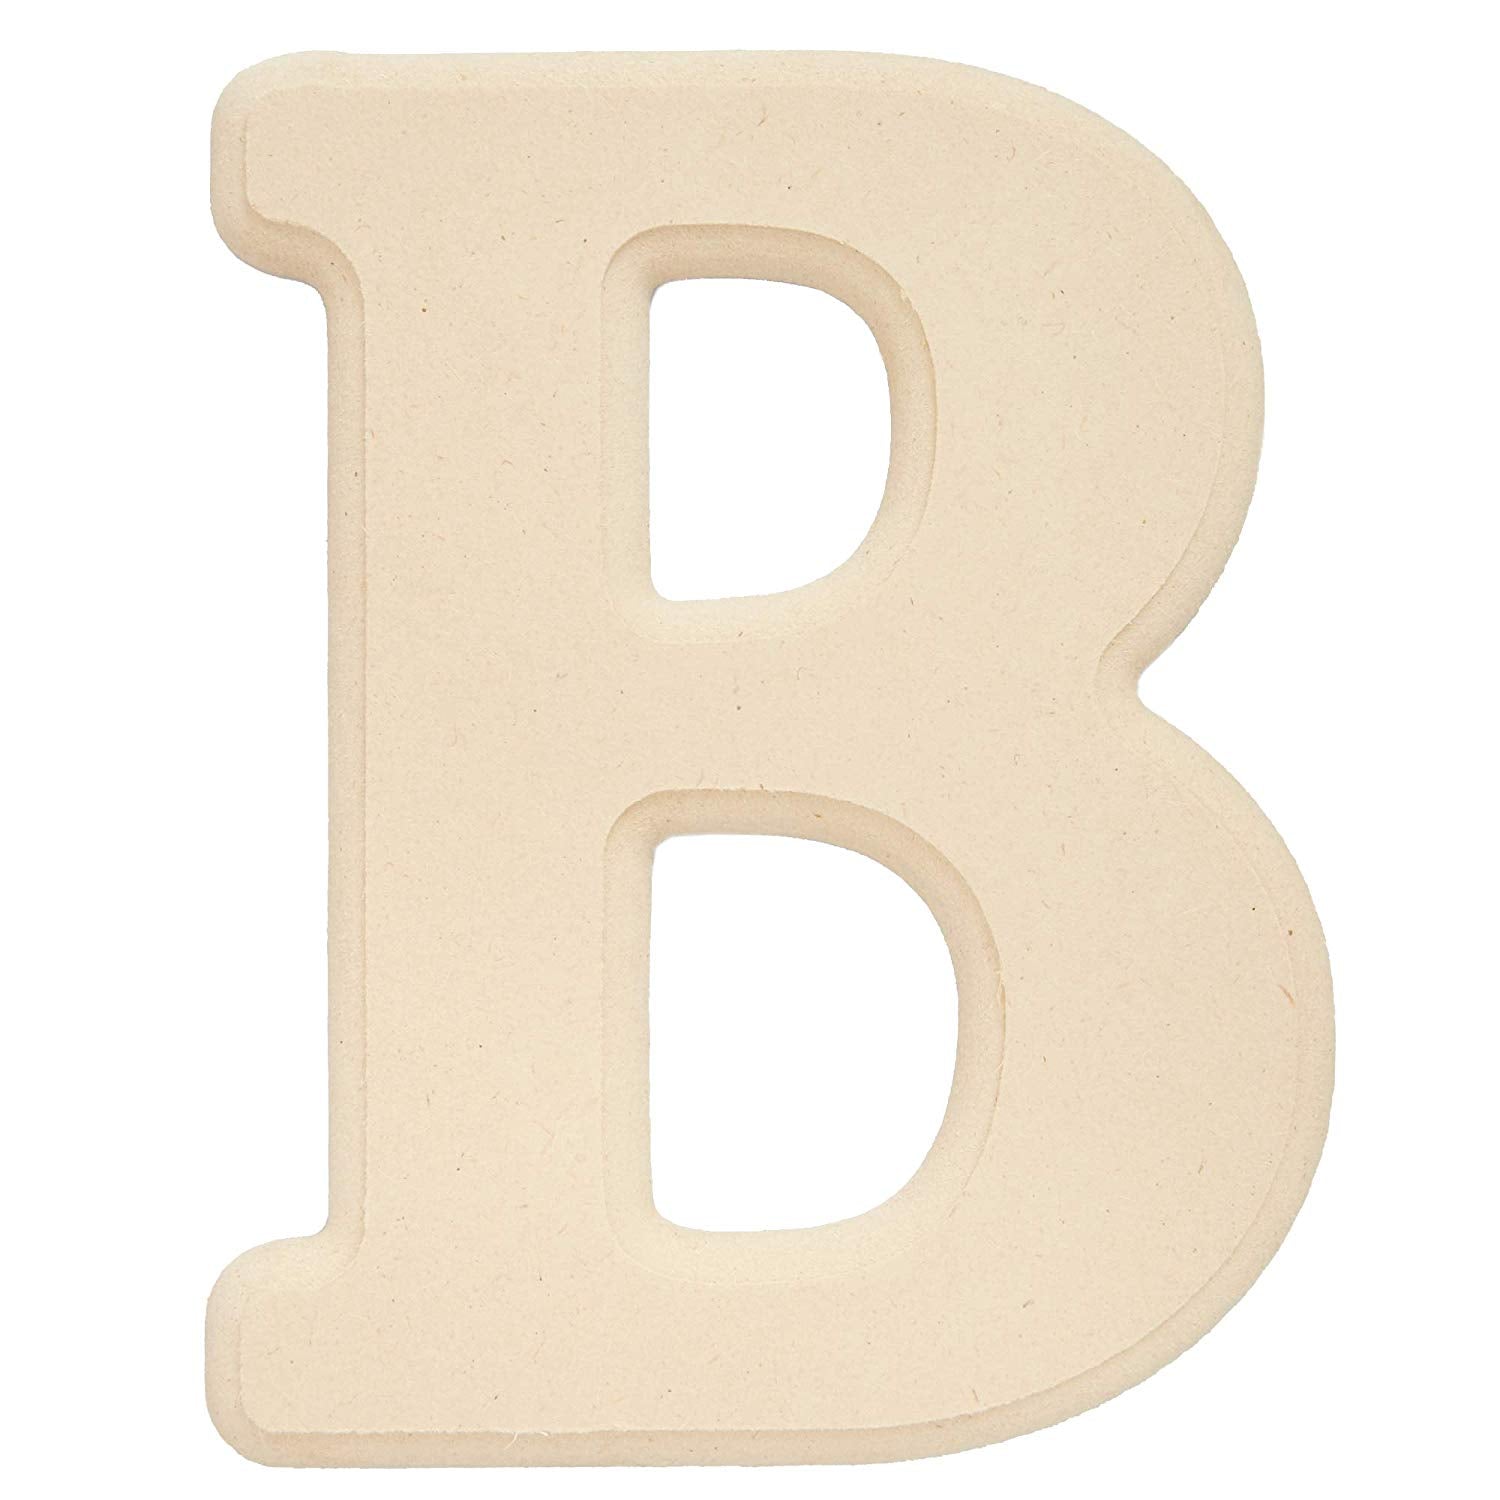 Bright Creations 26 Pieces Wooden Alphabet Letters for Crafts, 6-Inch ABCs for Painting, DIY Projects, Home Decor (0.1 Thick)